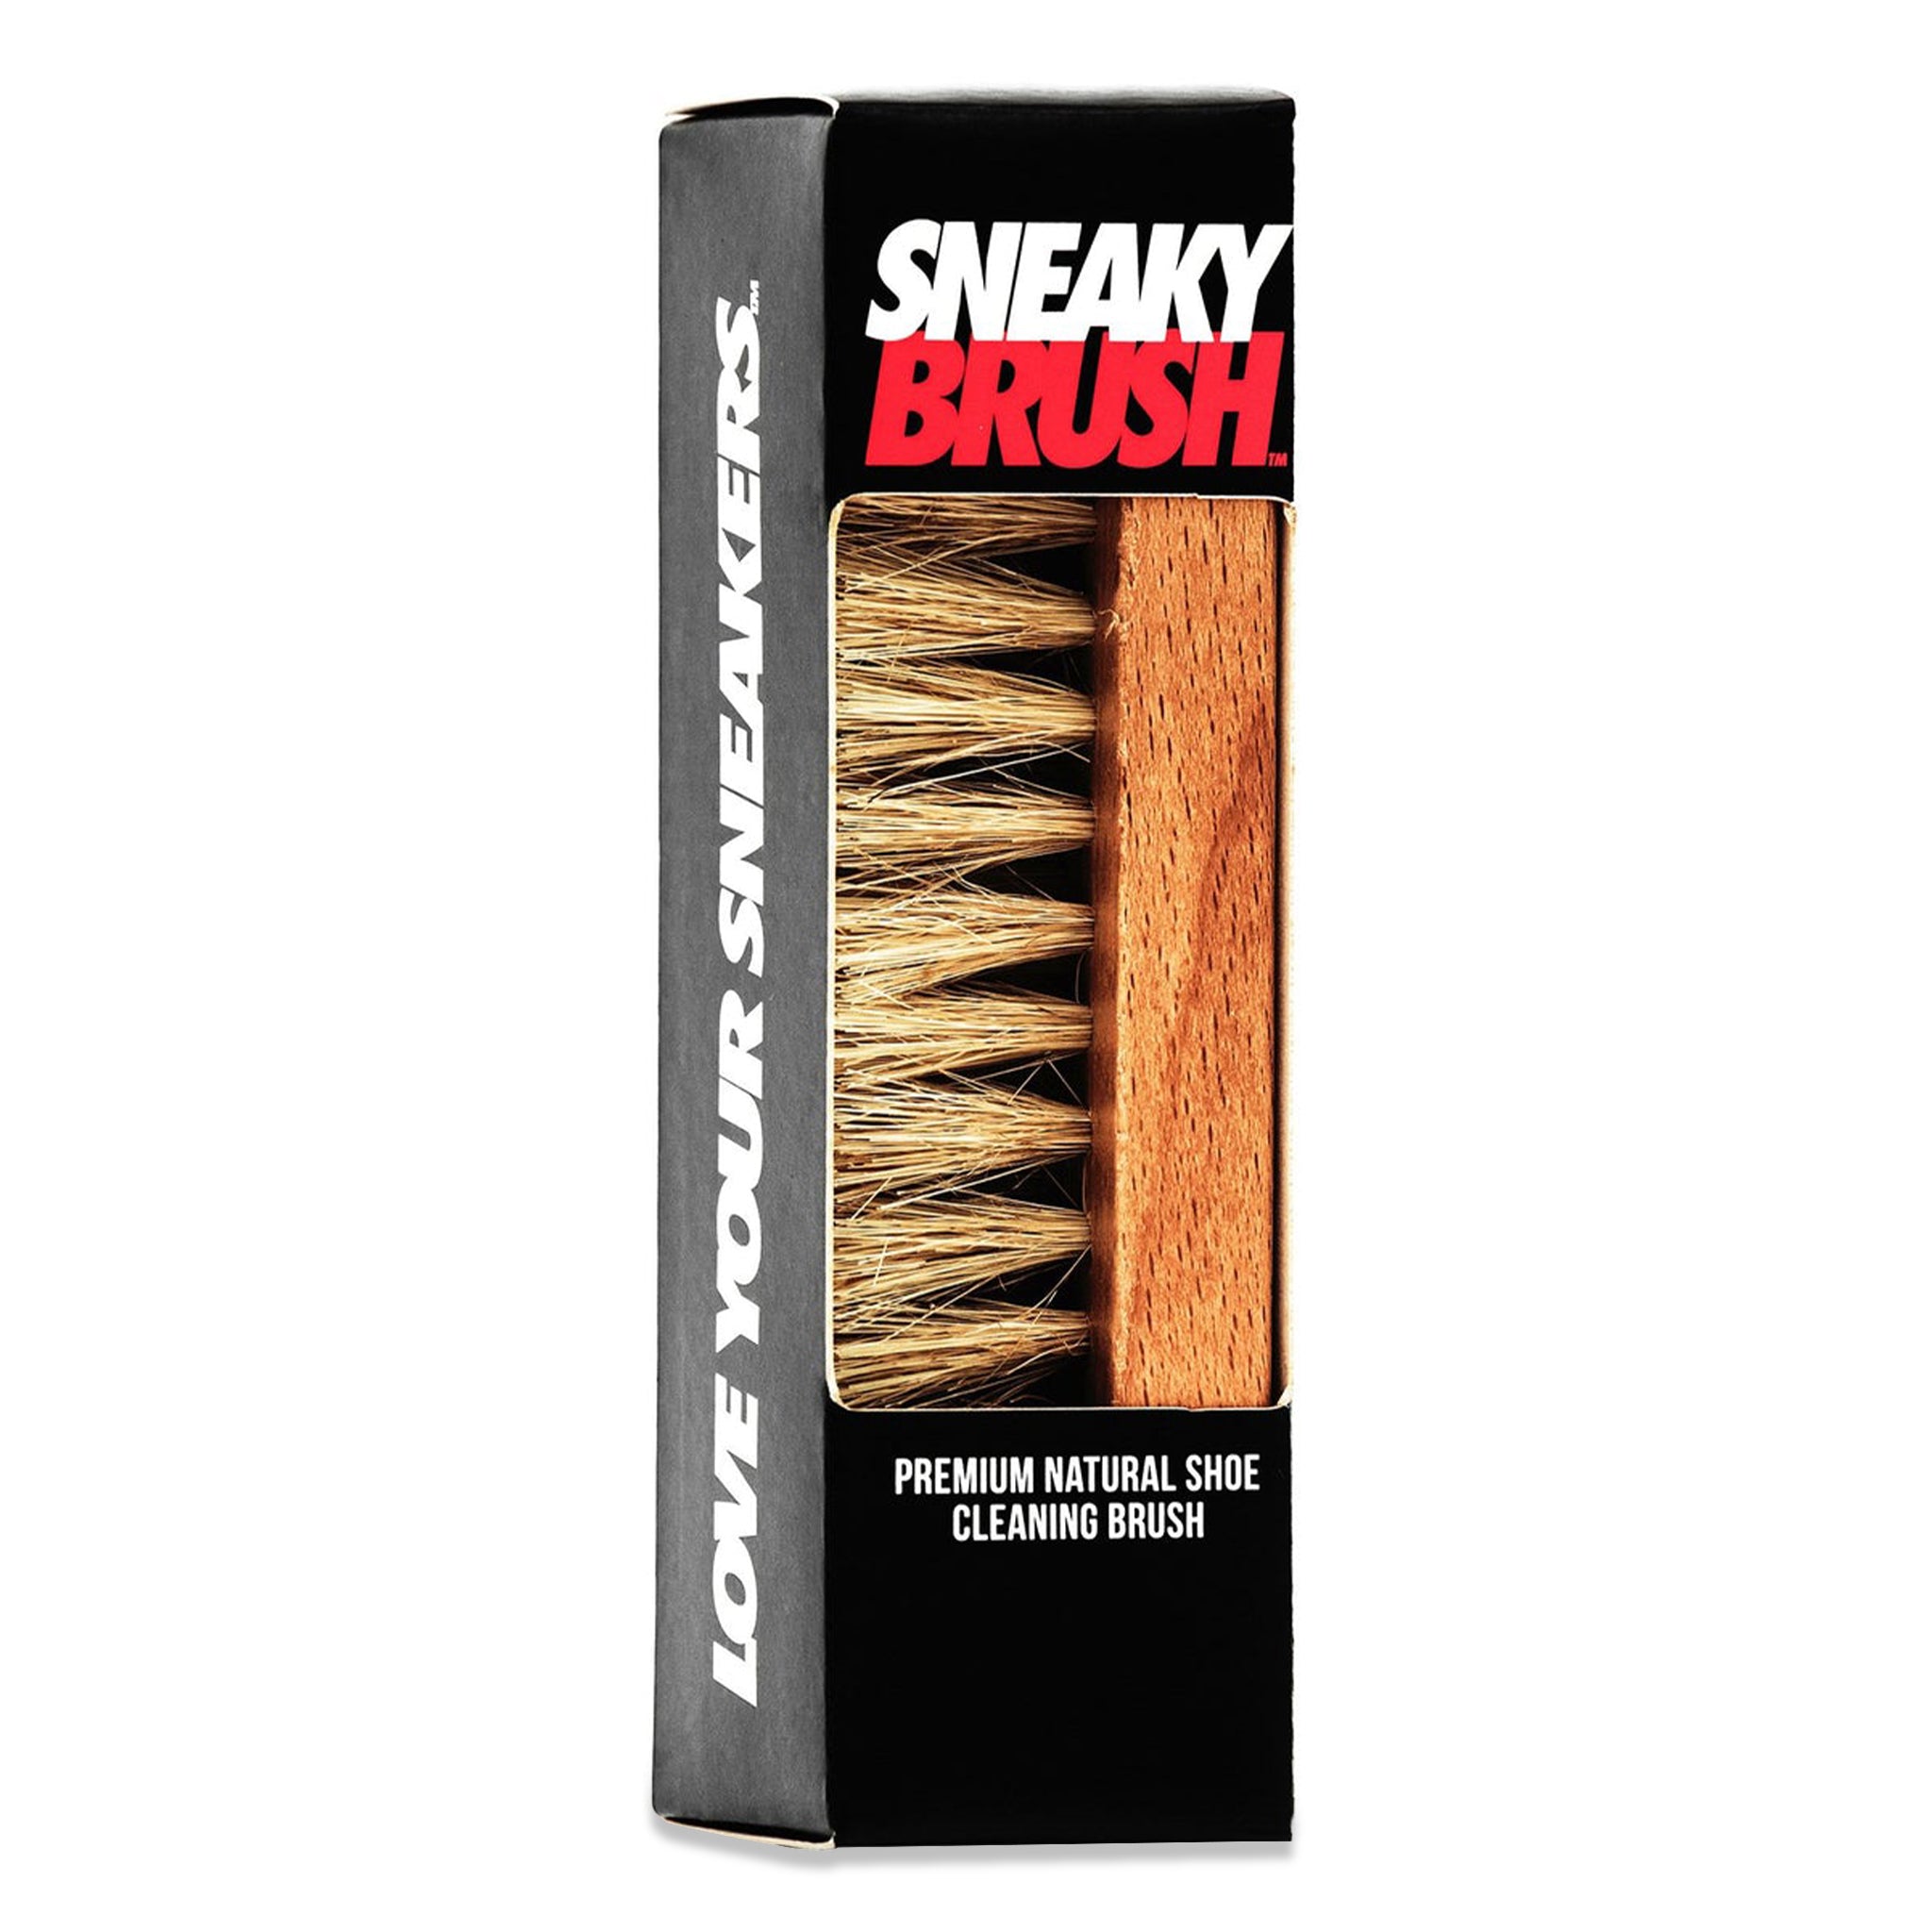 Image of Sneaky Brush - Premium Sneaker and Shoe than Cleaning Brush